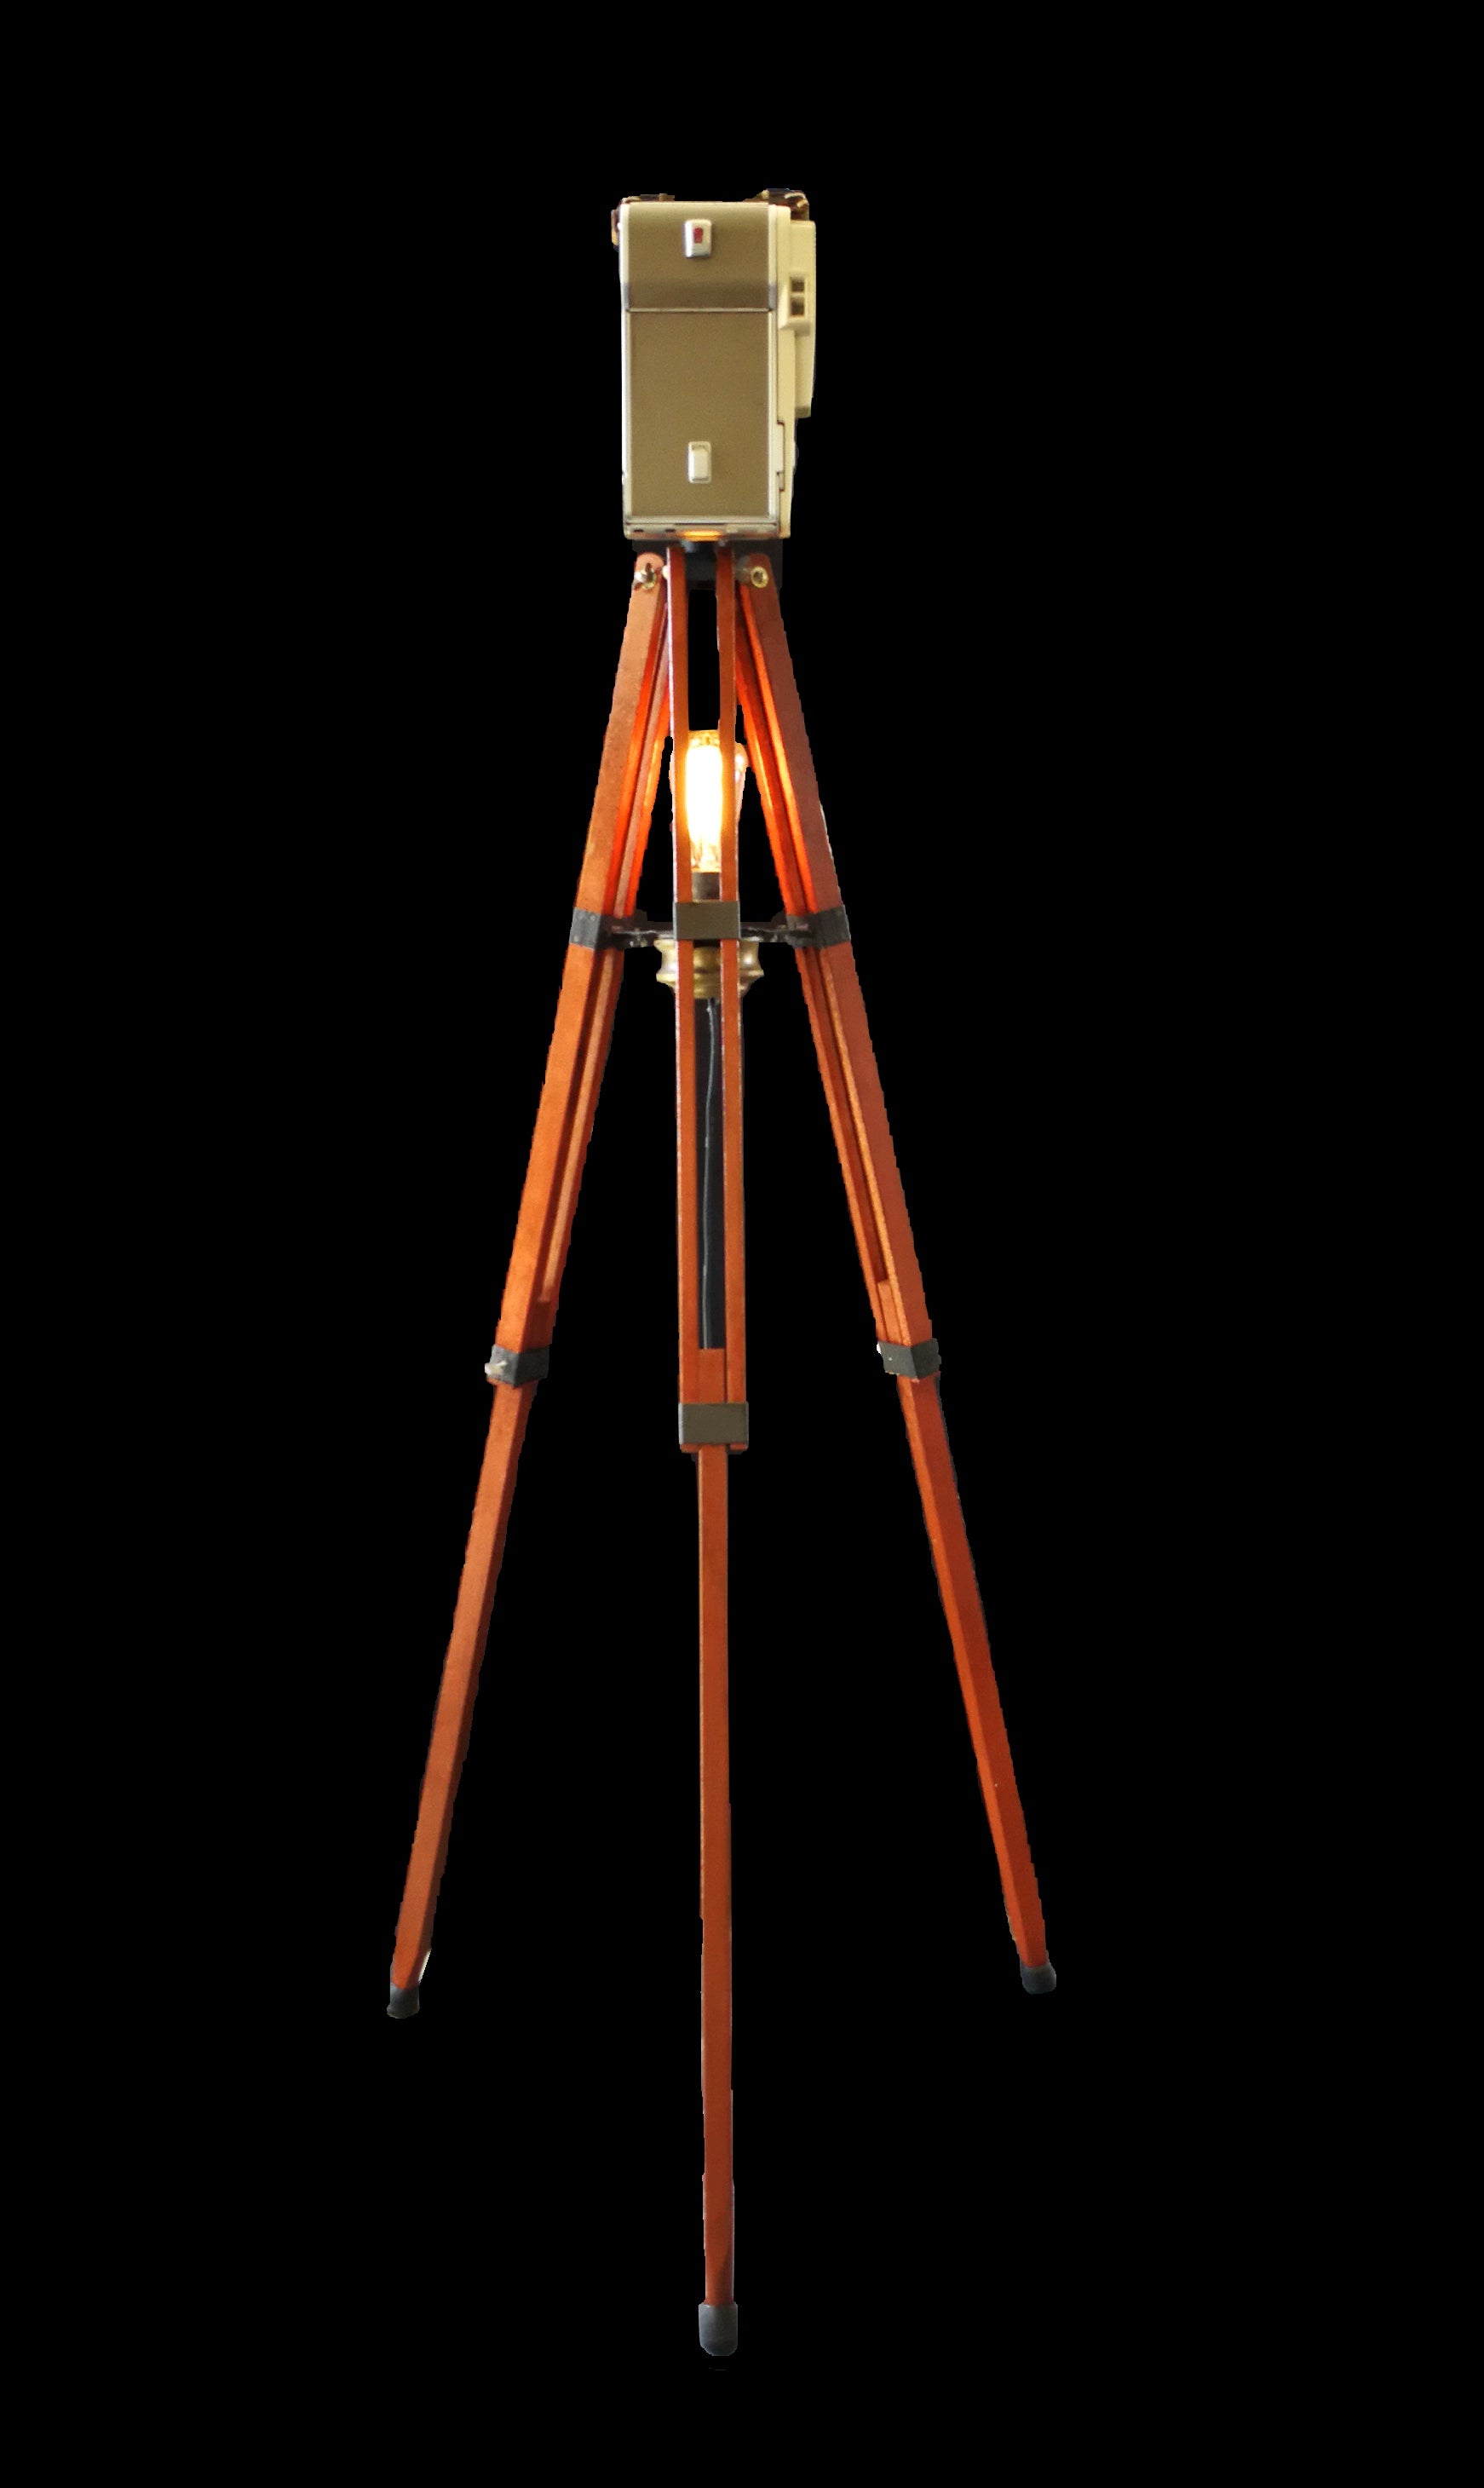 Tripod light with vintage camera rear view